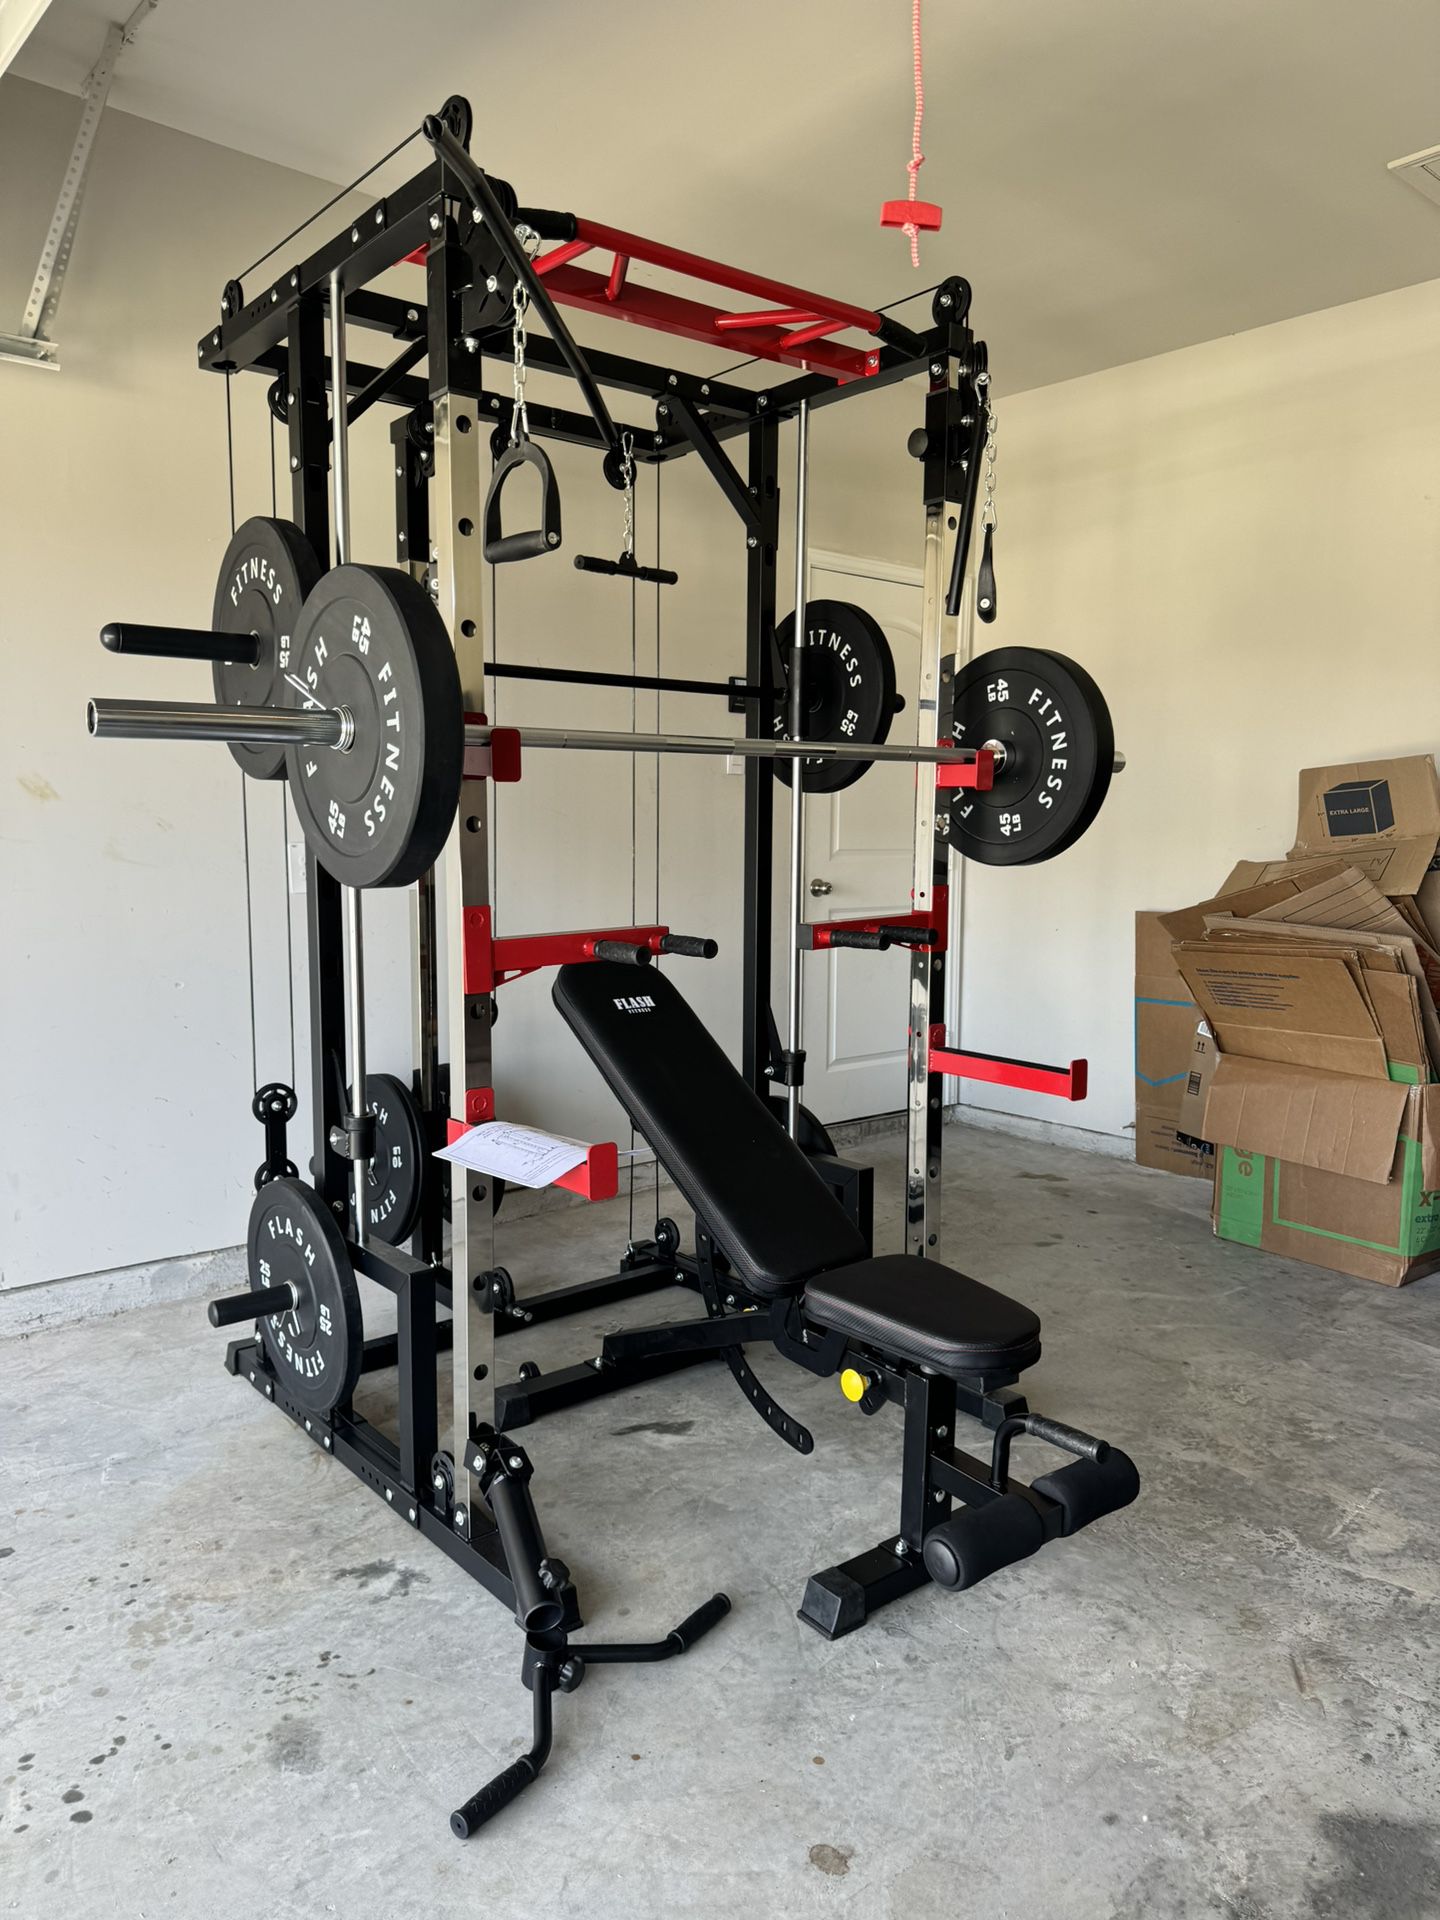 Flash F10 Smith Machine Combo With Weights Bench And Barbell Brand New In The Box 📦 